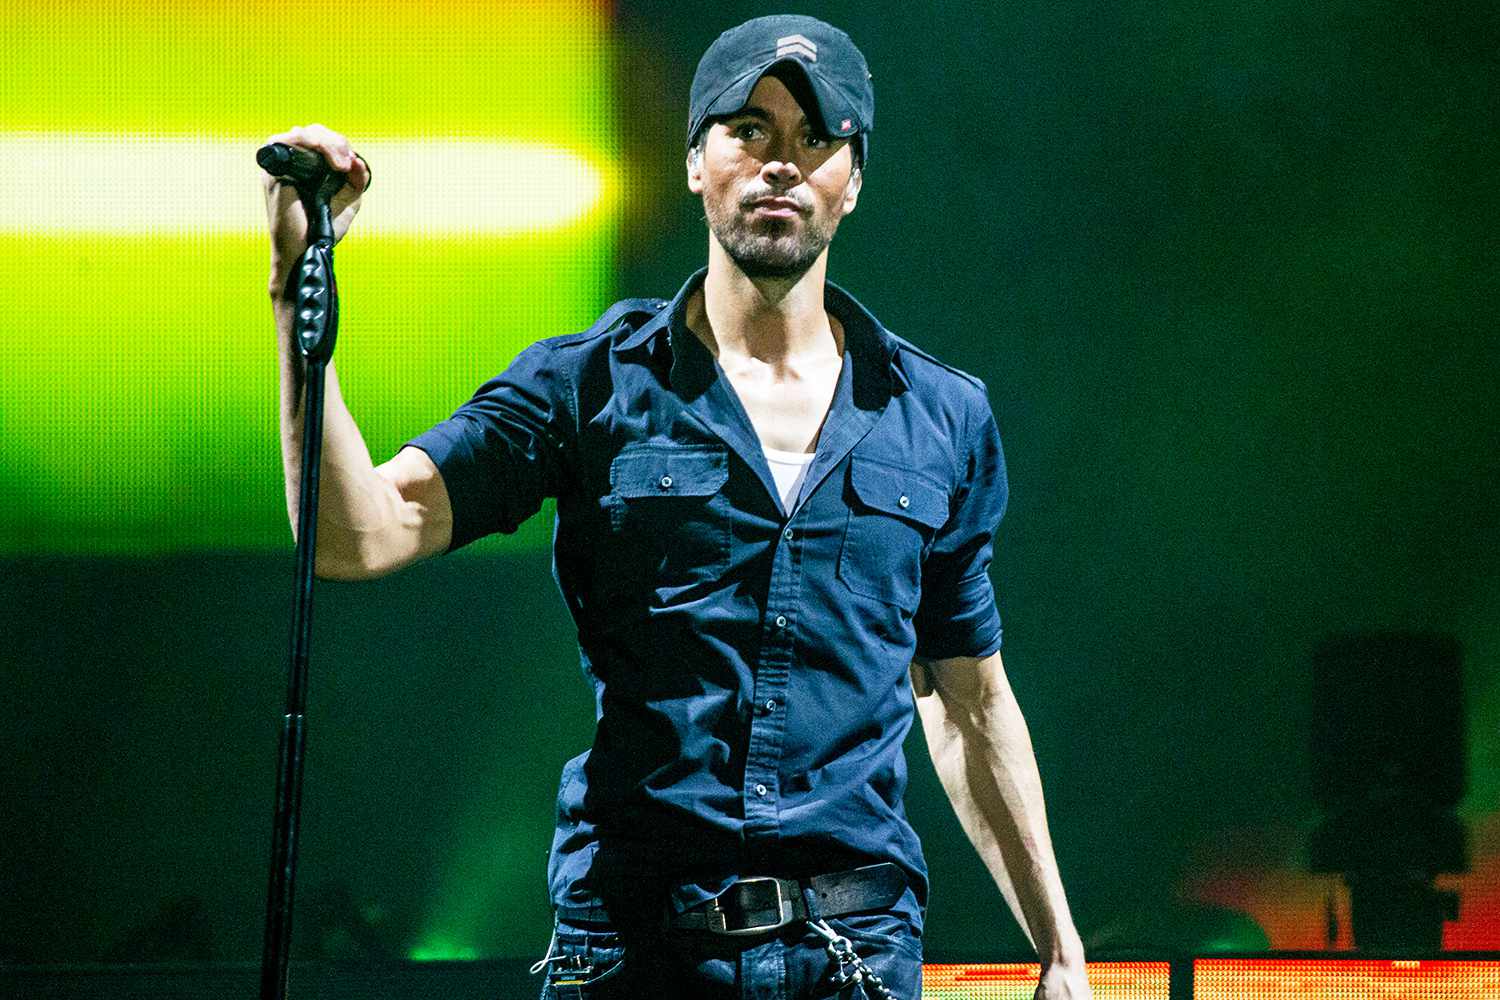 Enrique Iglesias Biography: Age, Net Worth, Wife, Children, Pictures, Movies, Songs